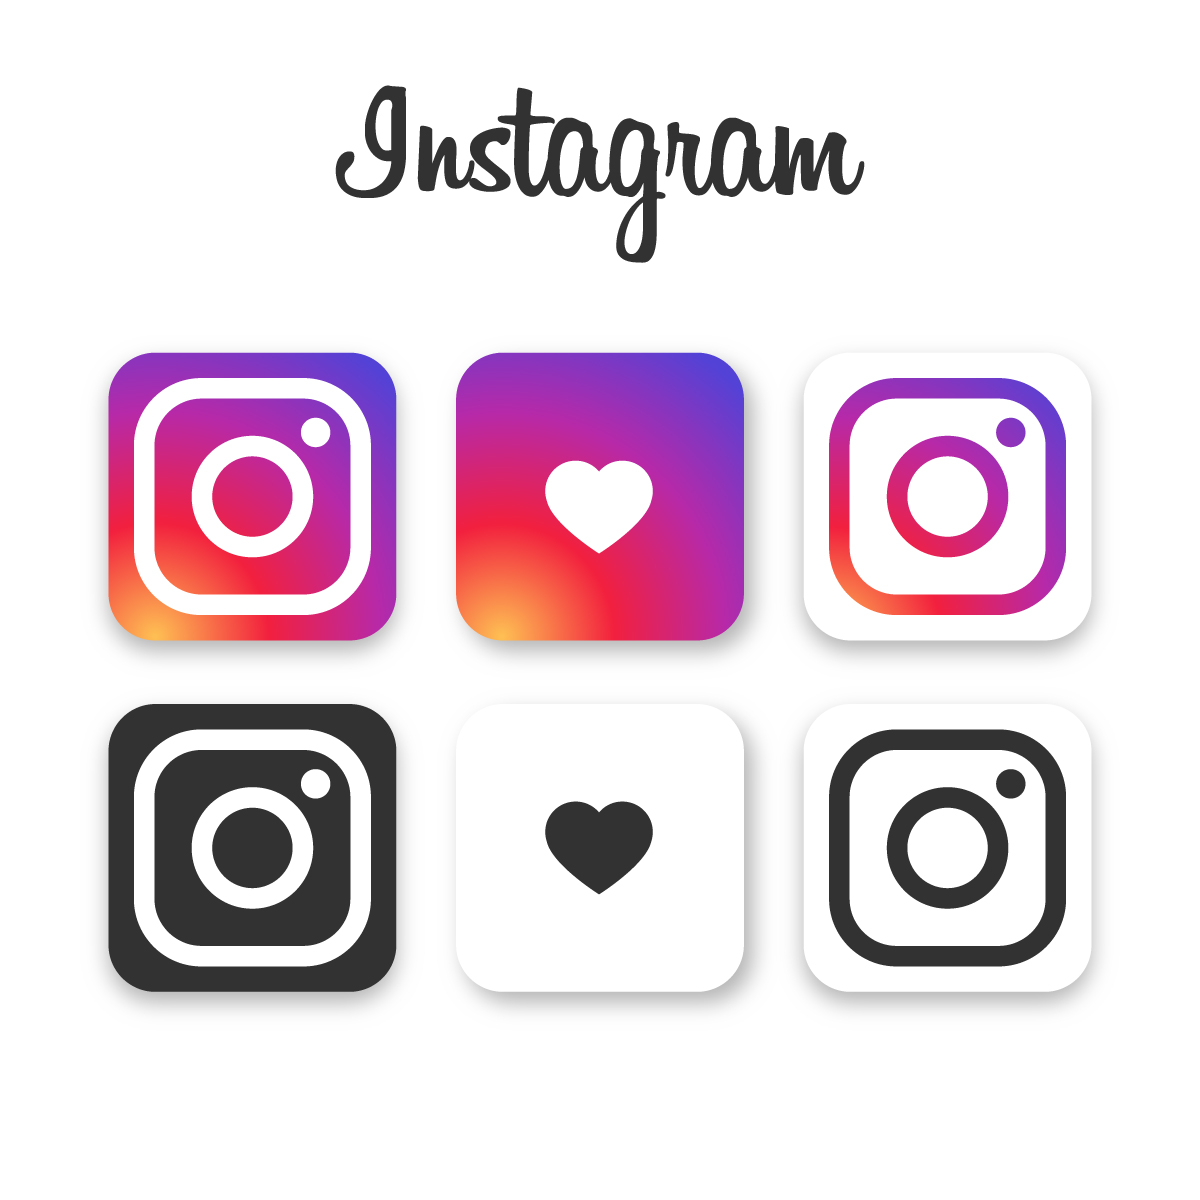 Instagram logo and like icons- colored and black & white.